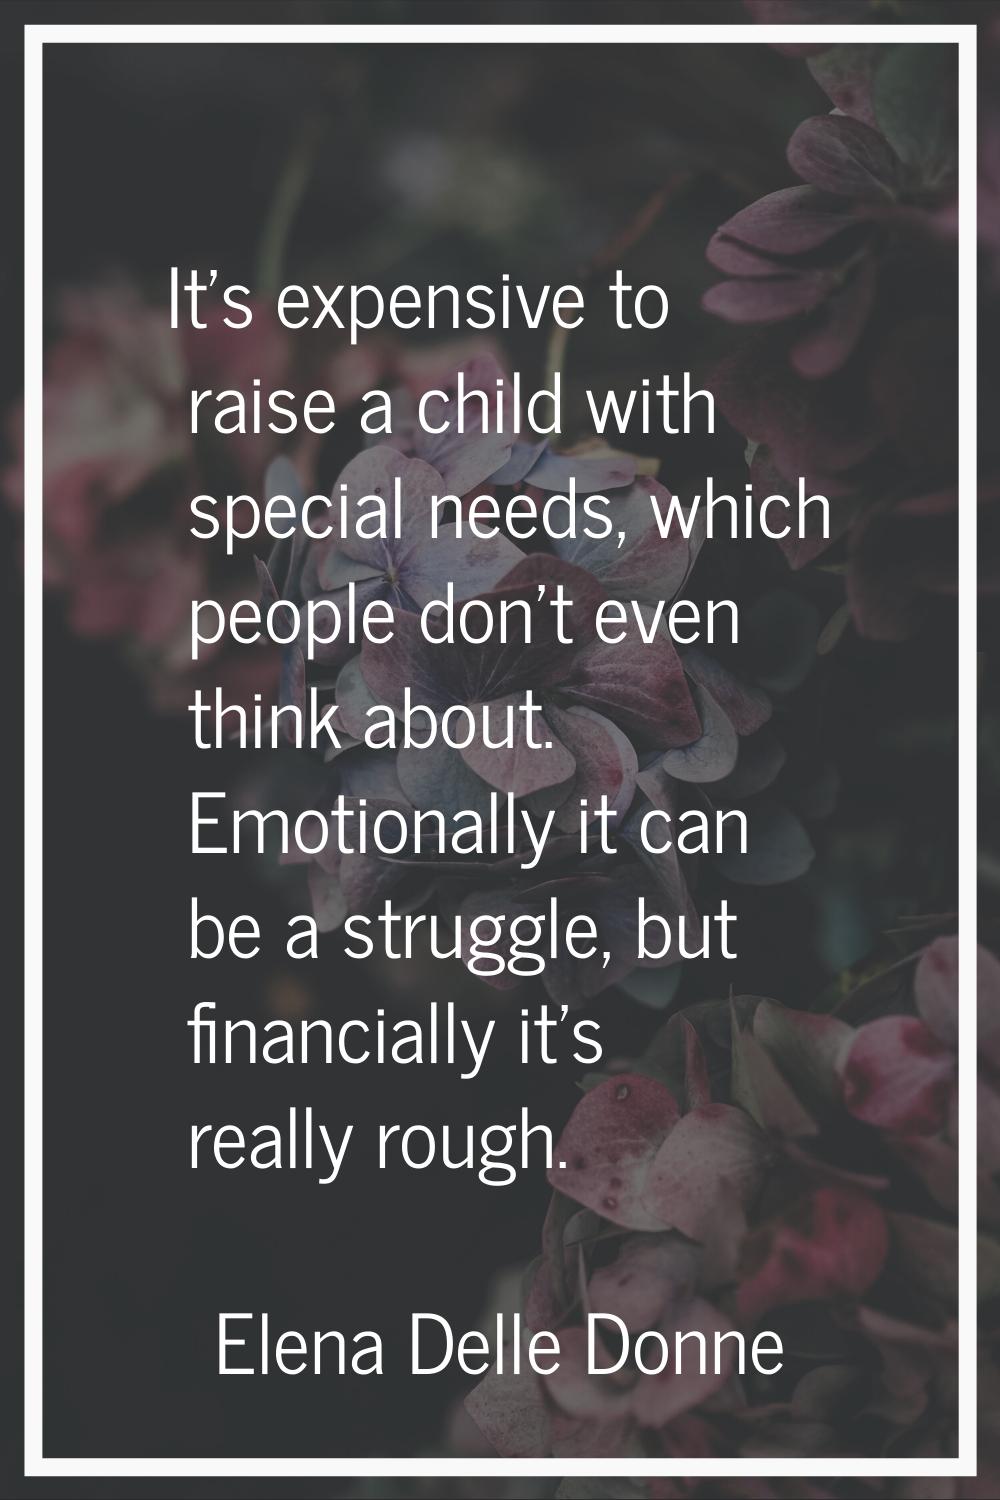 It's expensive to raise a child with special needs, which people don't even think about. Emotionall